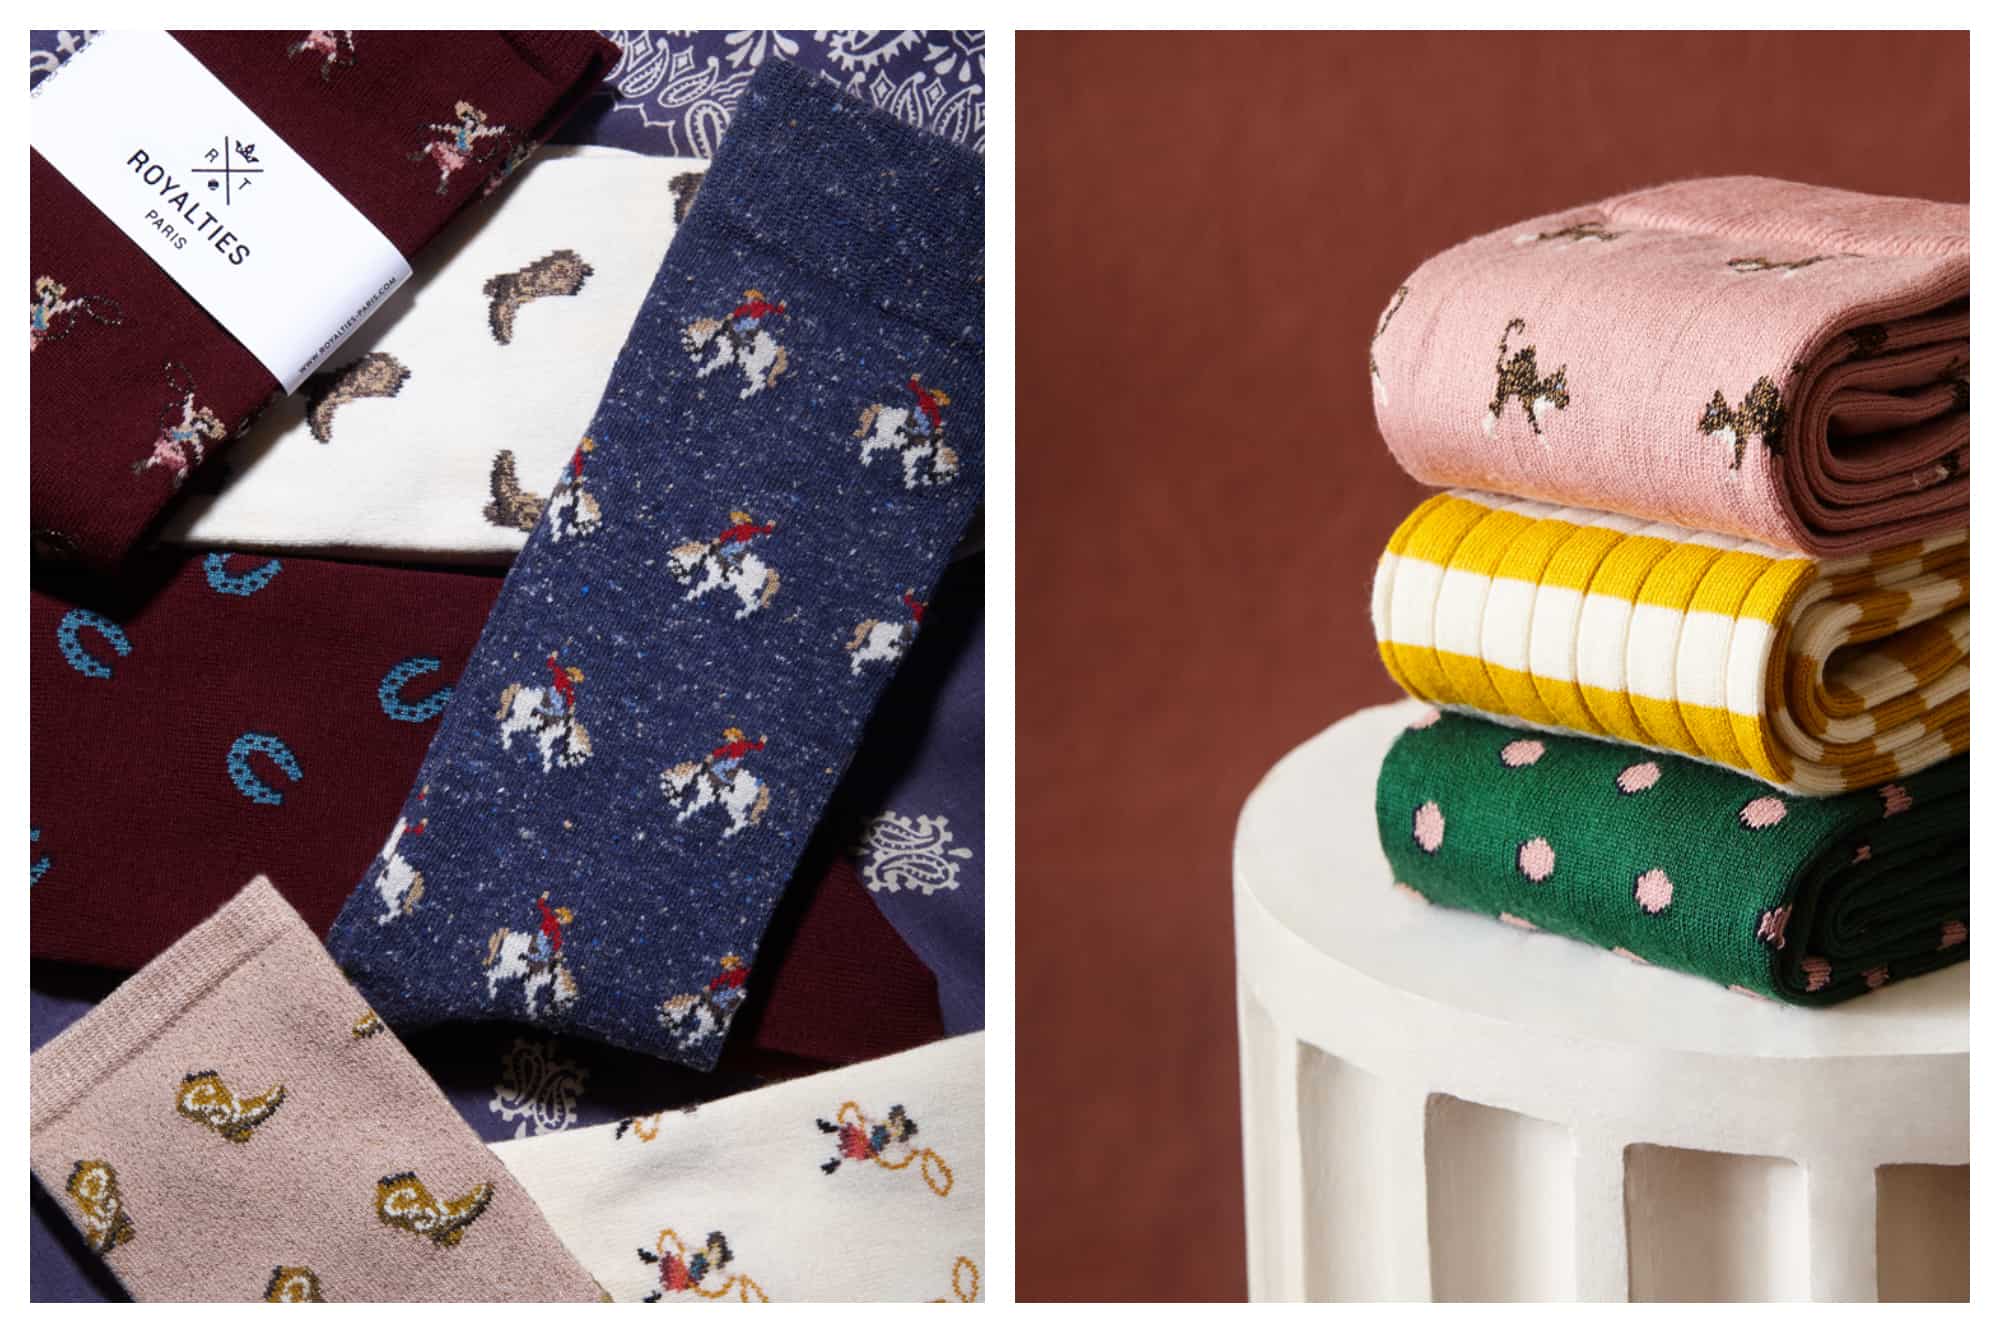 On the left are several pairs of Royalties socks in blue, burgundy, white and pink with assorted patterns. On the right are fold stacks of colourful socks from the Parisian store Royalties in pink, yellow and white and green and pink.